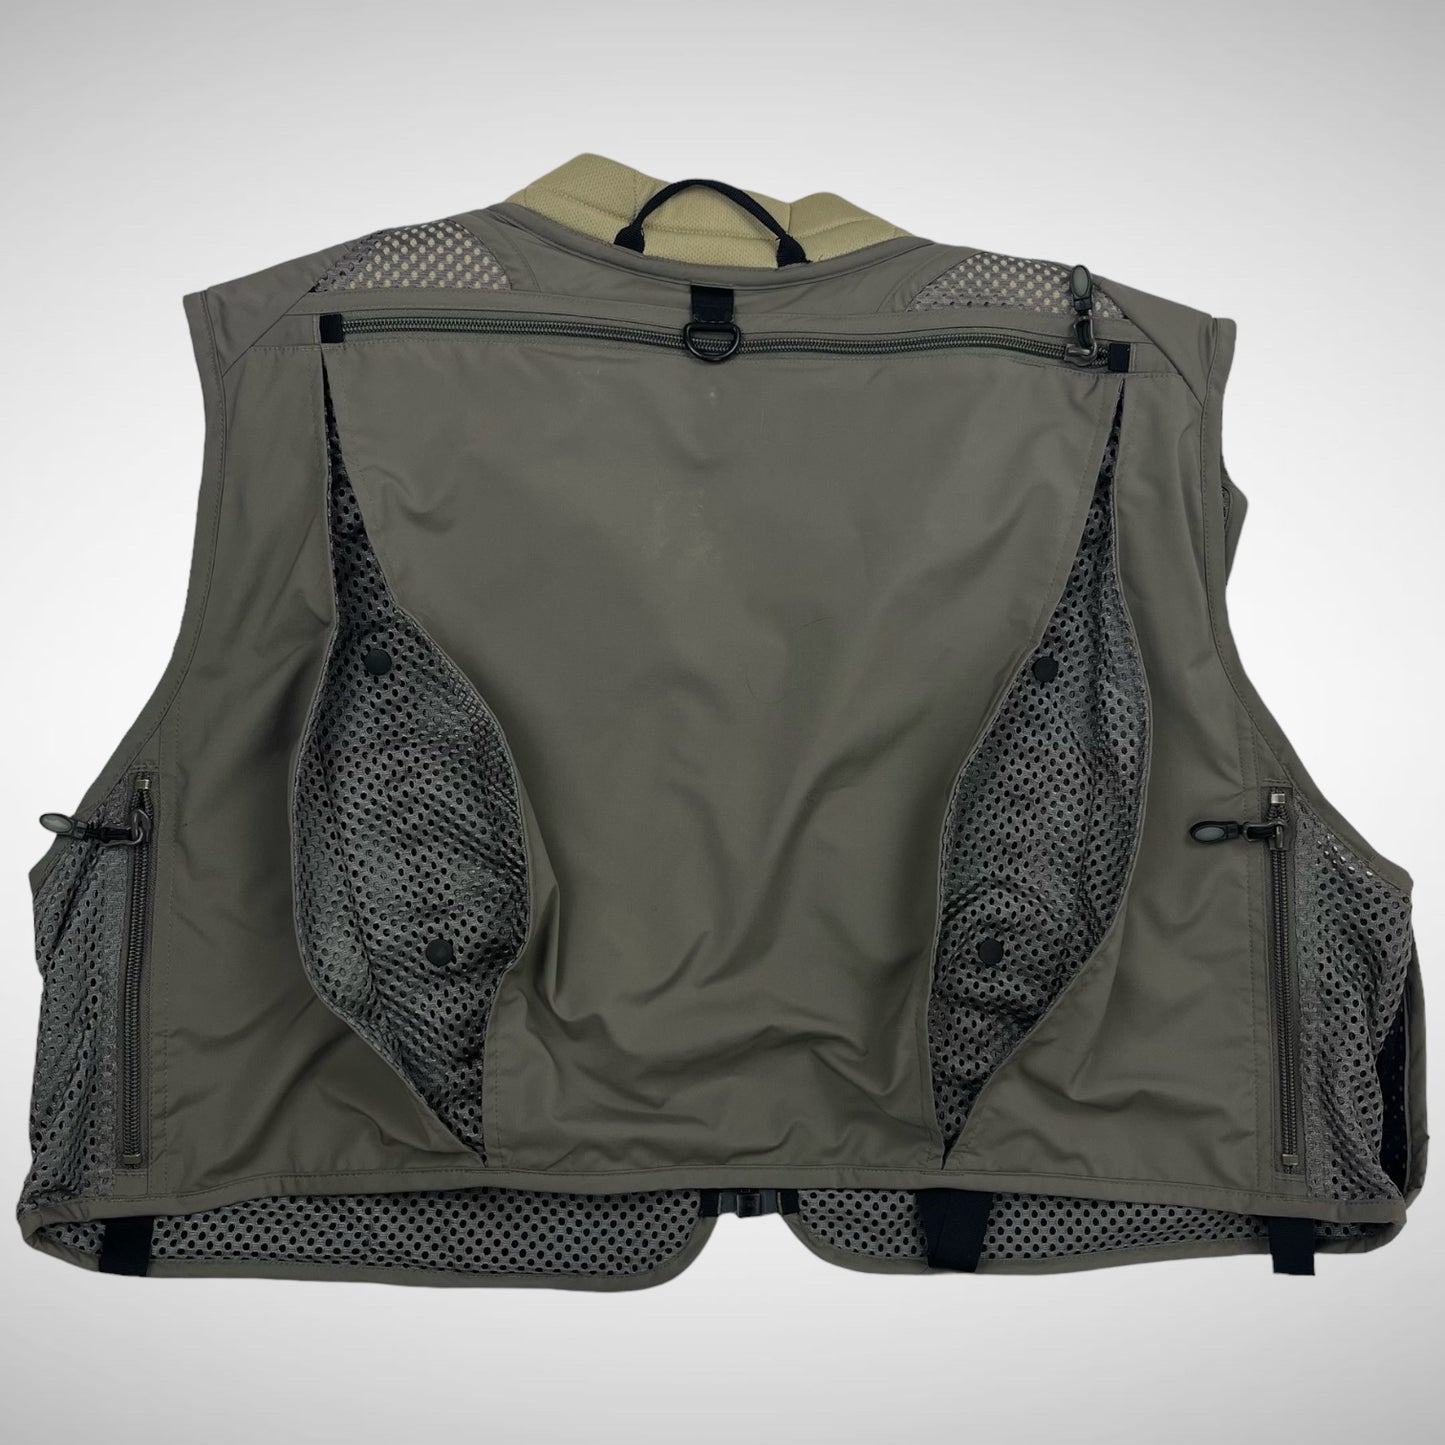 Patagonia Flying Fish Tactical Vest (2000s)